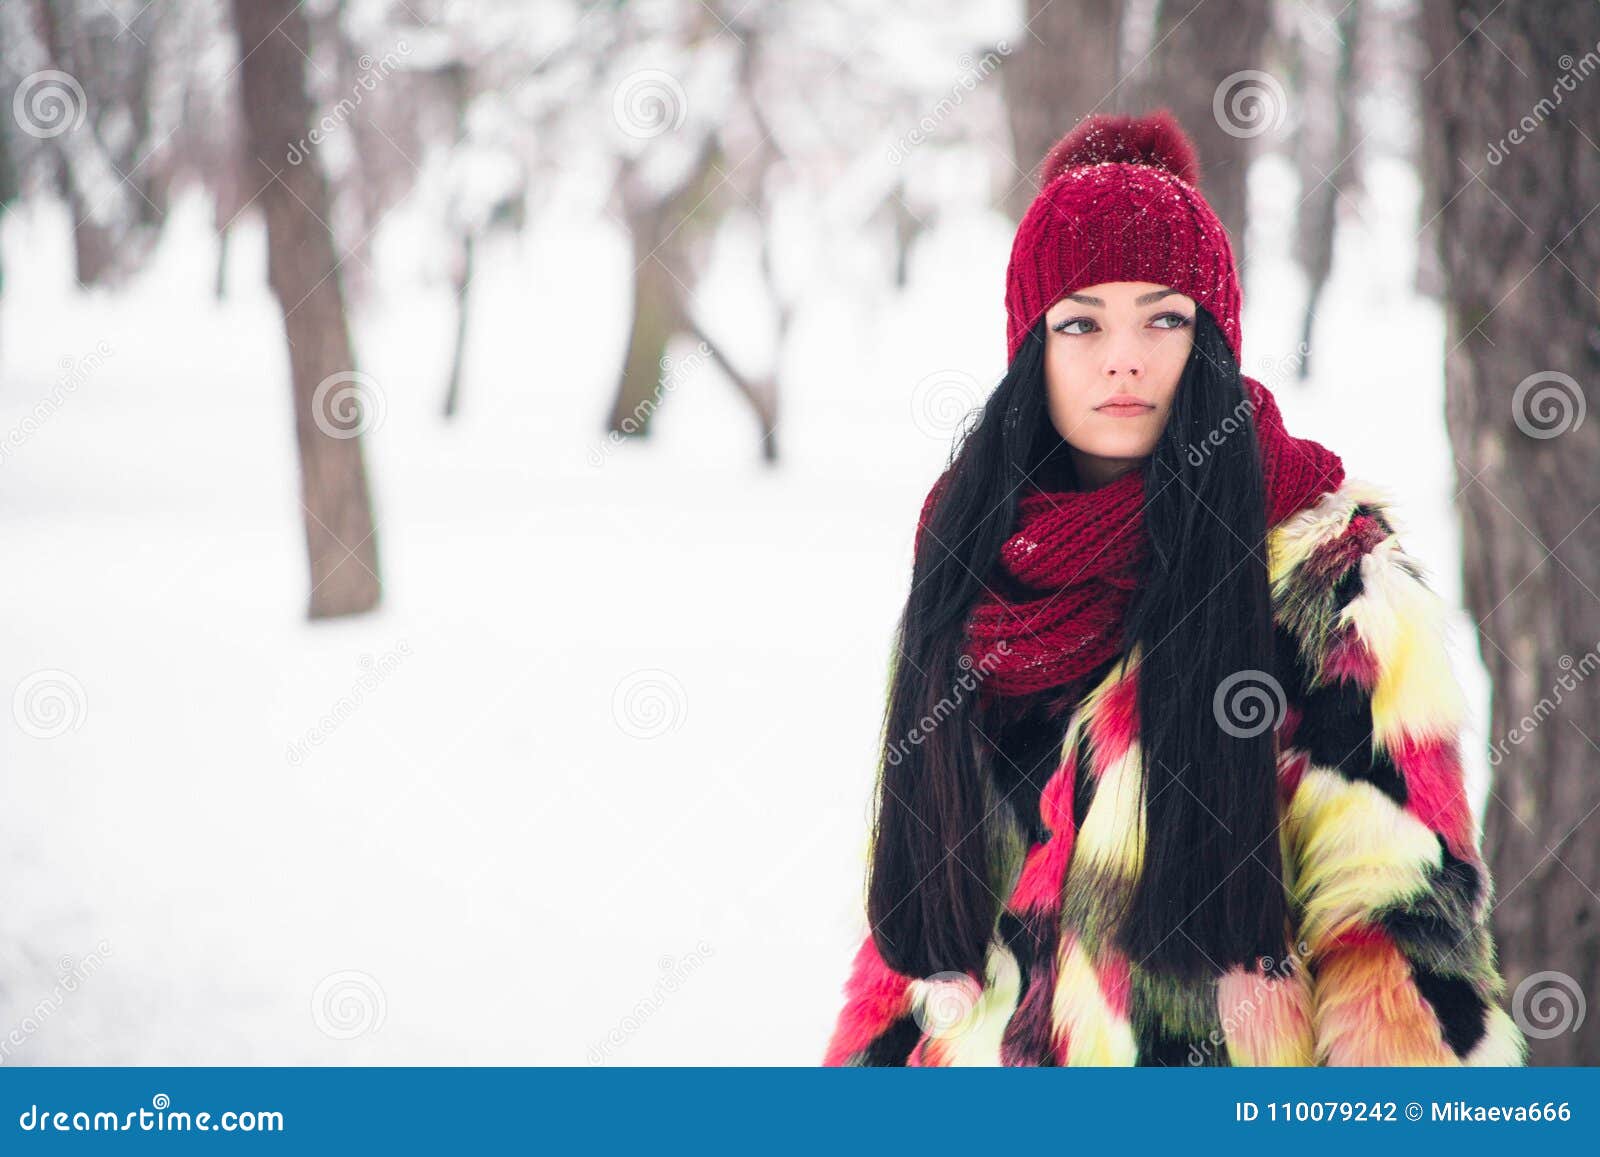 Young Woman in Multi-colored Fur Coat Stock Photo - Image of lifestyle ...